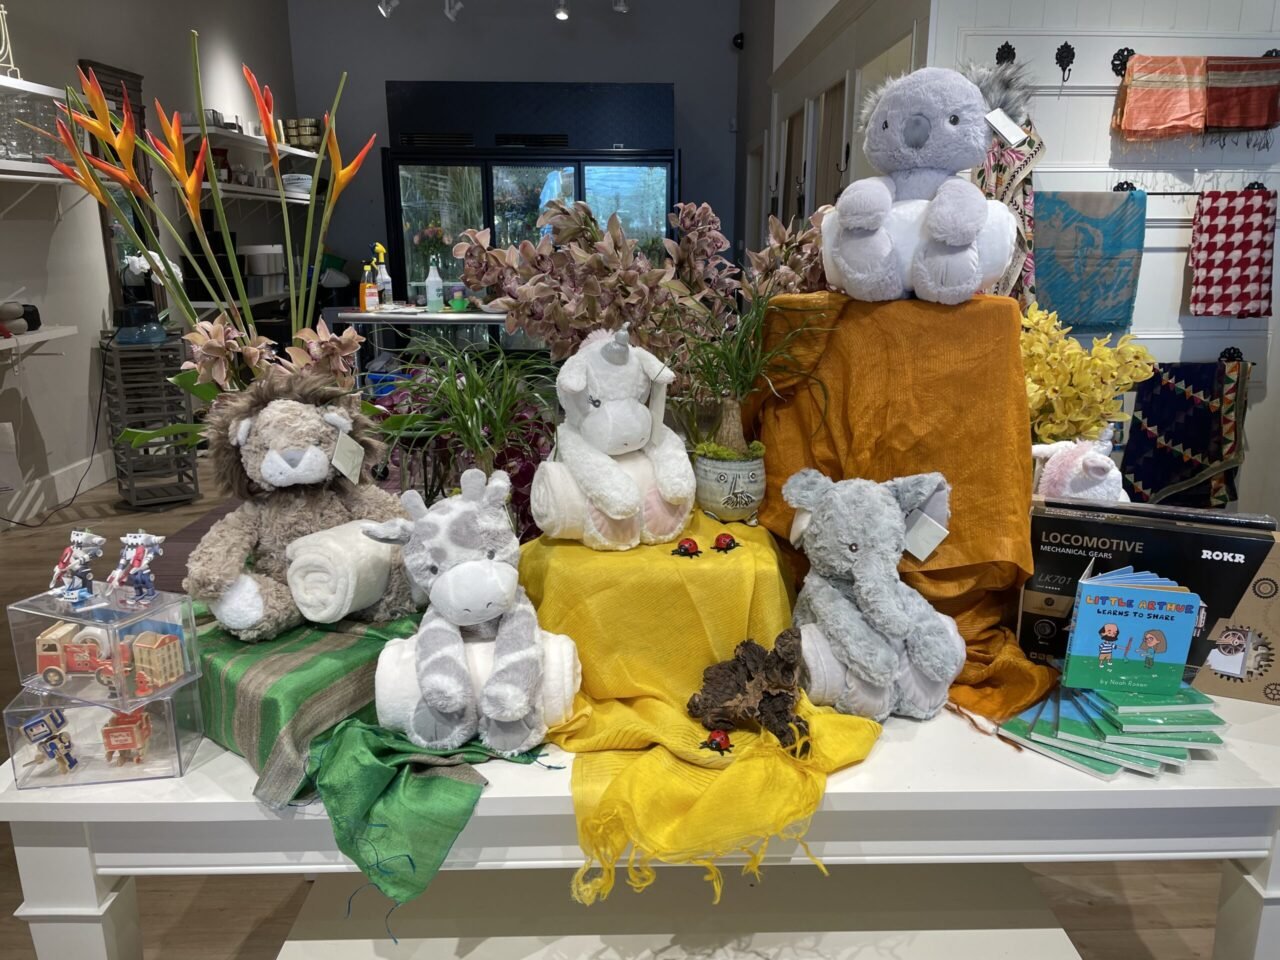 A display of stuffed animals and plants on a table.